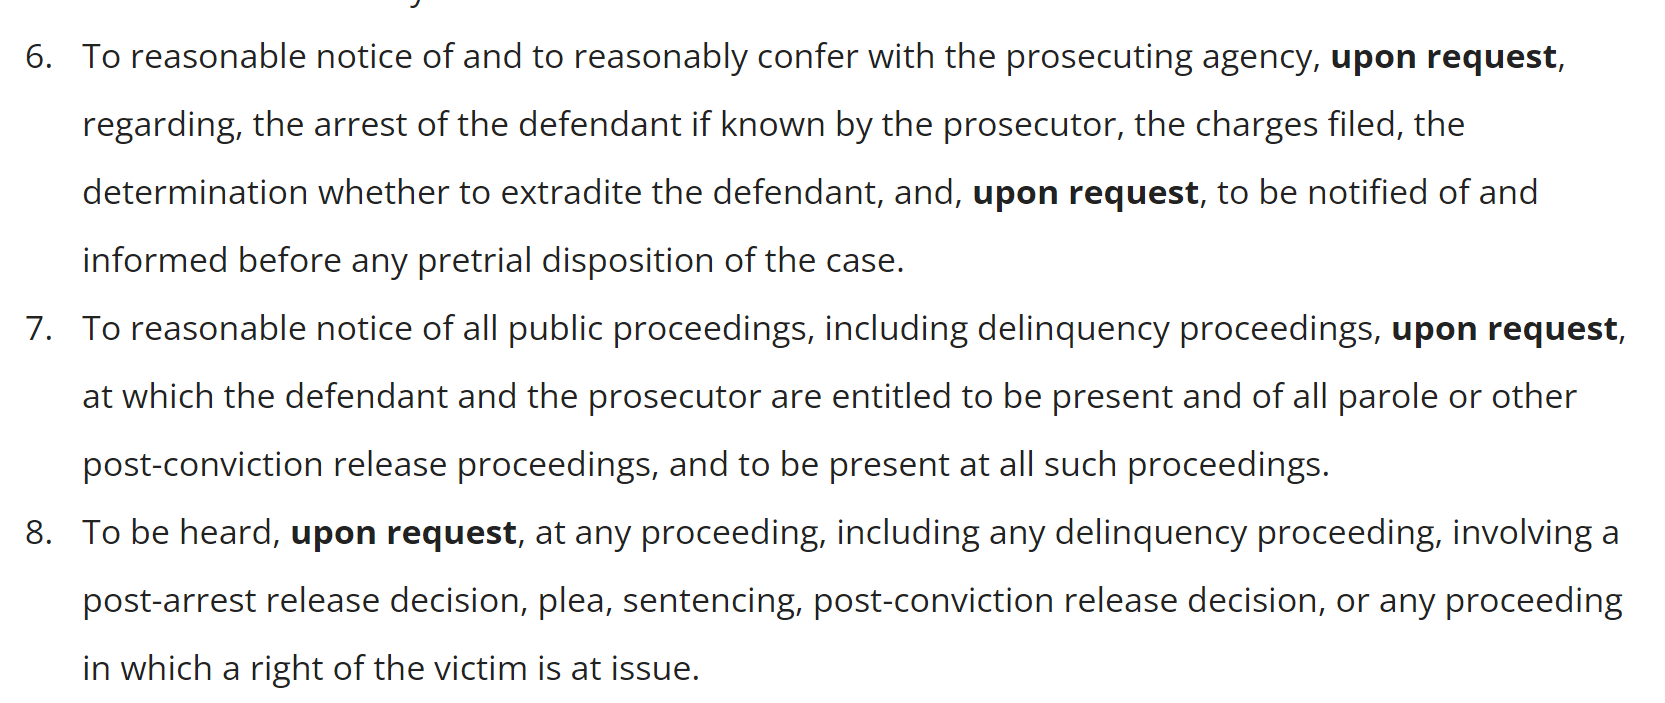 To reasonable notice of and to reasonably confer with the prosecuting agency, upon request, regarding, the arrest of the defendant if known by the prosecutor, the charges filed, the determination whether to extradite the defendant, and, [bolded] upon request, to be notified of and informed before any pretrial disposition of the case. 7. To reasonable notice of all public proceedings, including delinquency proceedings, upon request, at which the defendant and the prosecutor are entitled to be present and of all parole or other post-conviction release proceedings, and to be present at all such proceedings. 8. To be heard, upon request, at any proceeding, including any delinquency proceeding, involving a post-arrest release decision, plea, sentencing, post-conviction release decision, or any proceeding in which a right of the victim is at issue